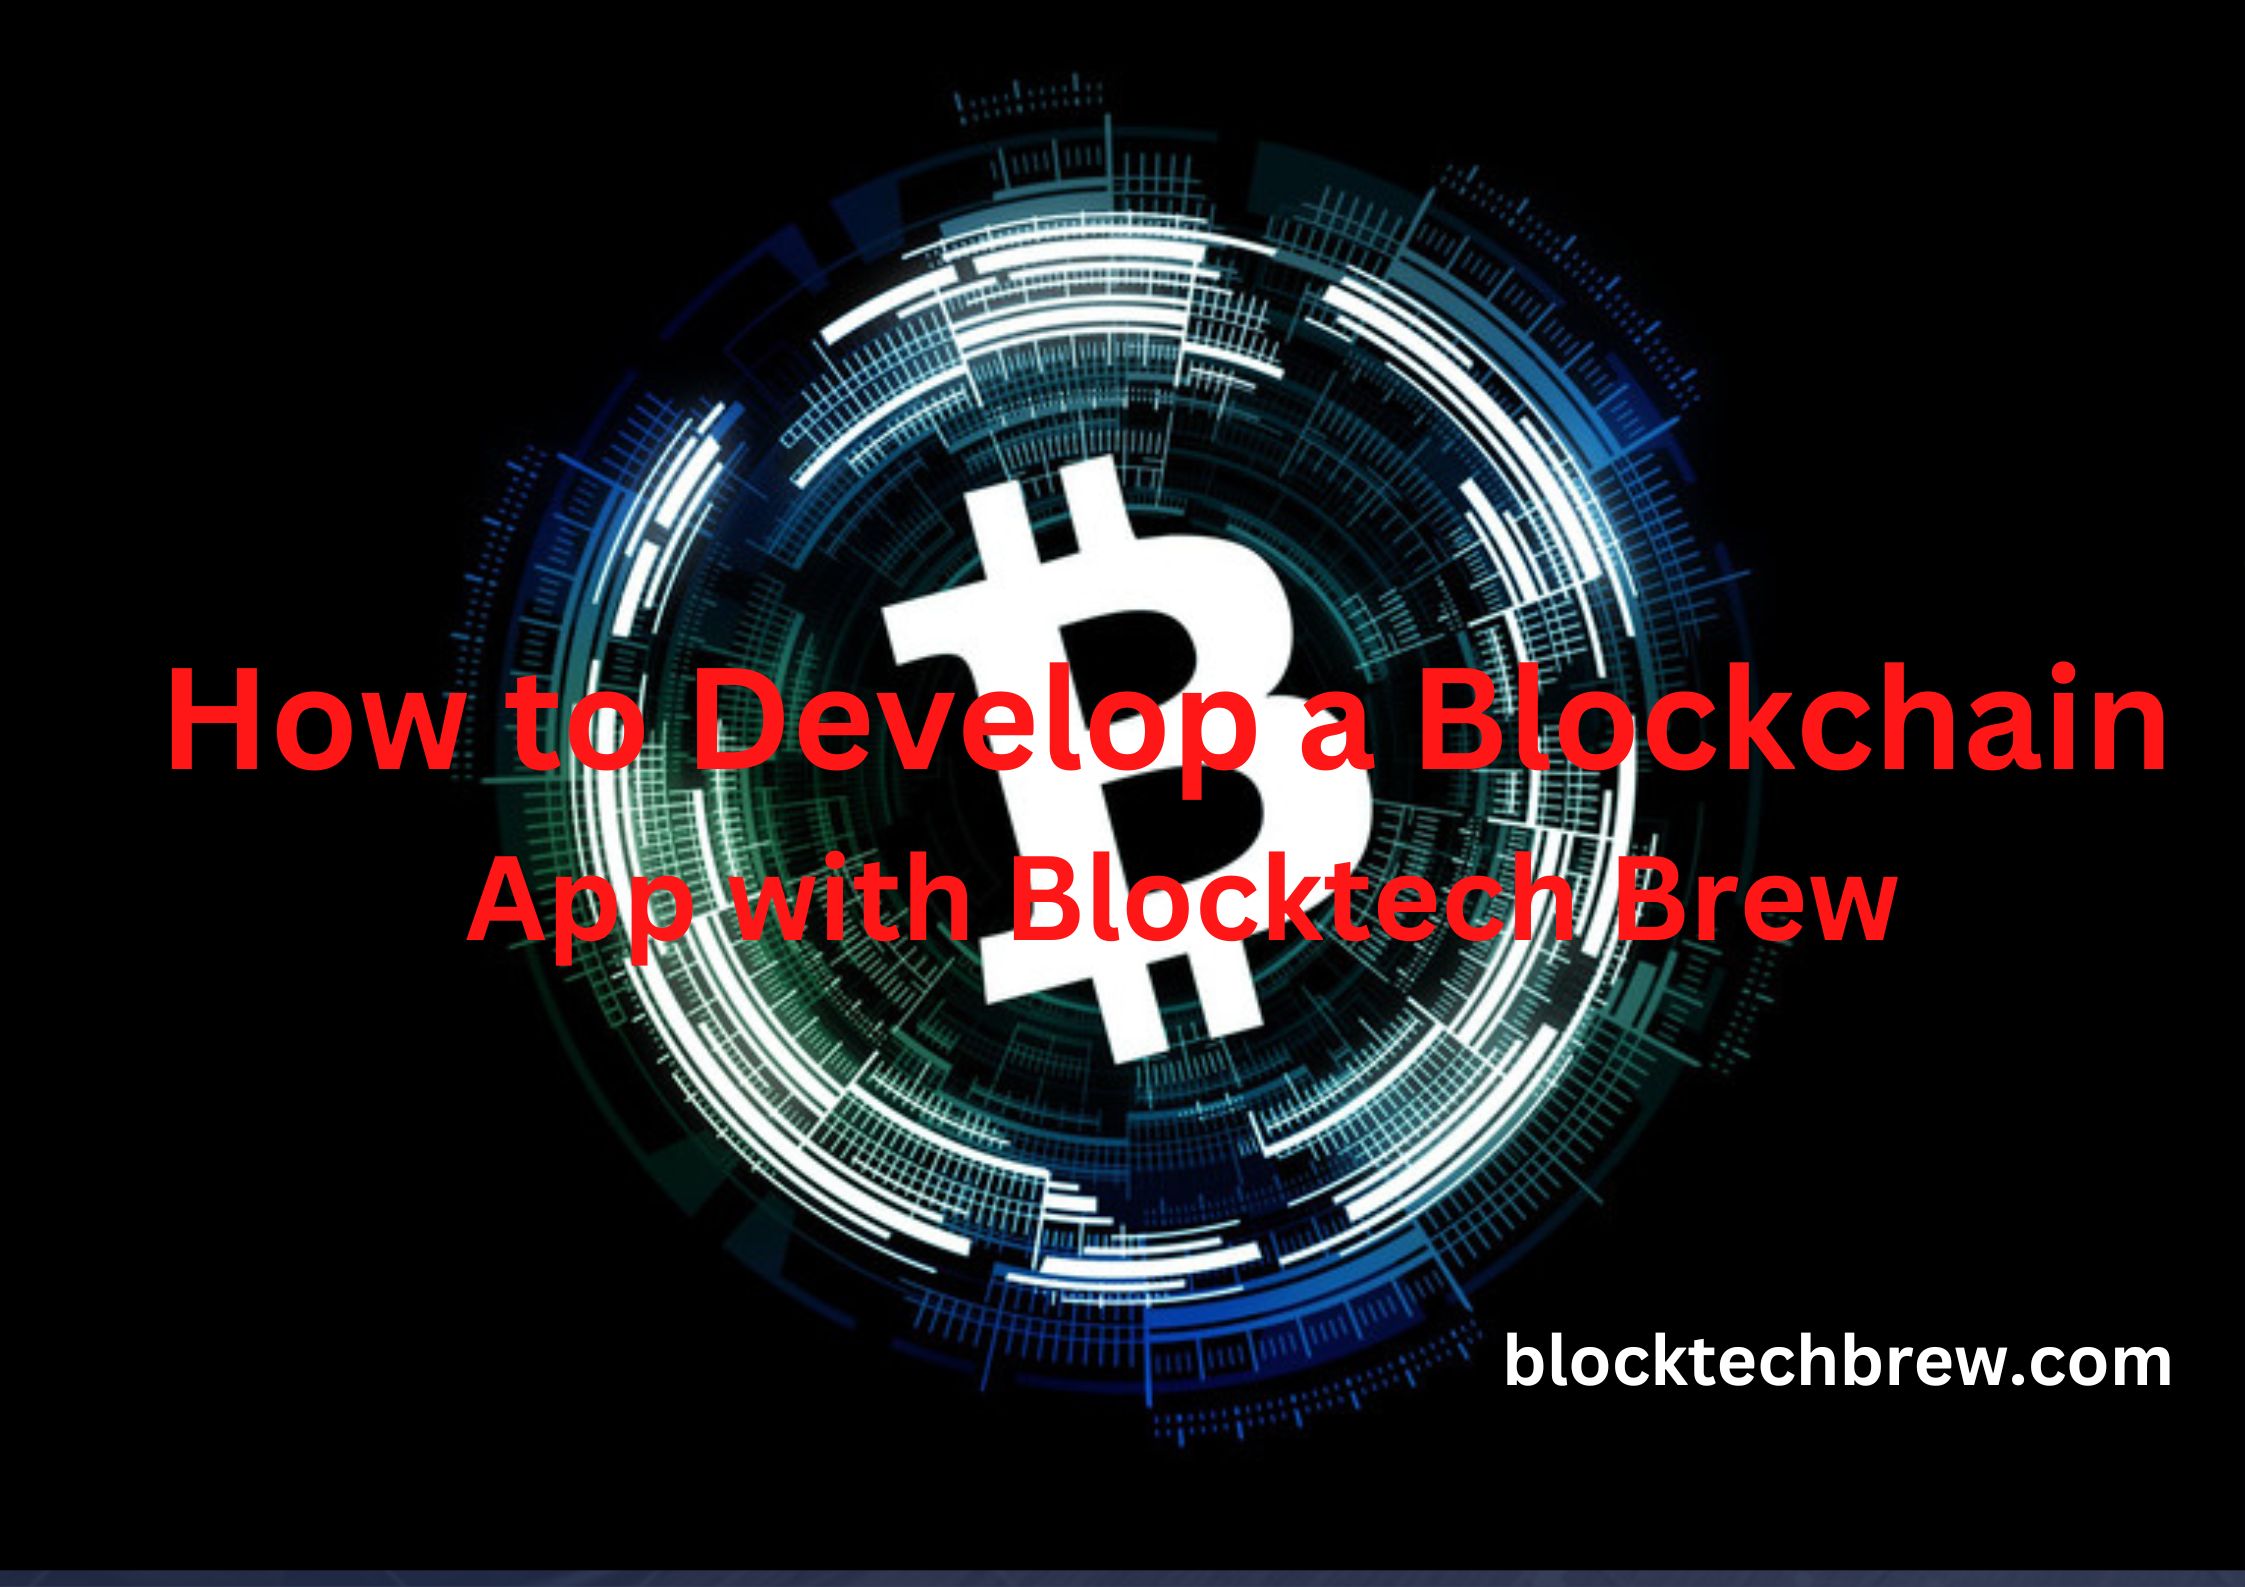 How to Develop a Blockchain App with Blocktech Brew